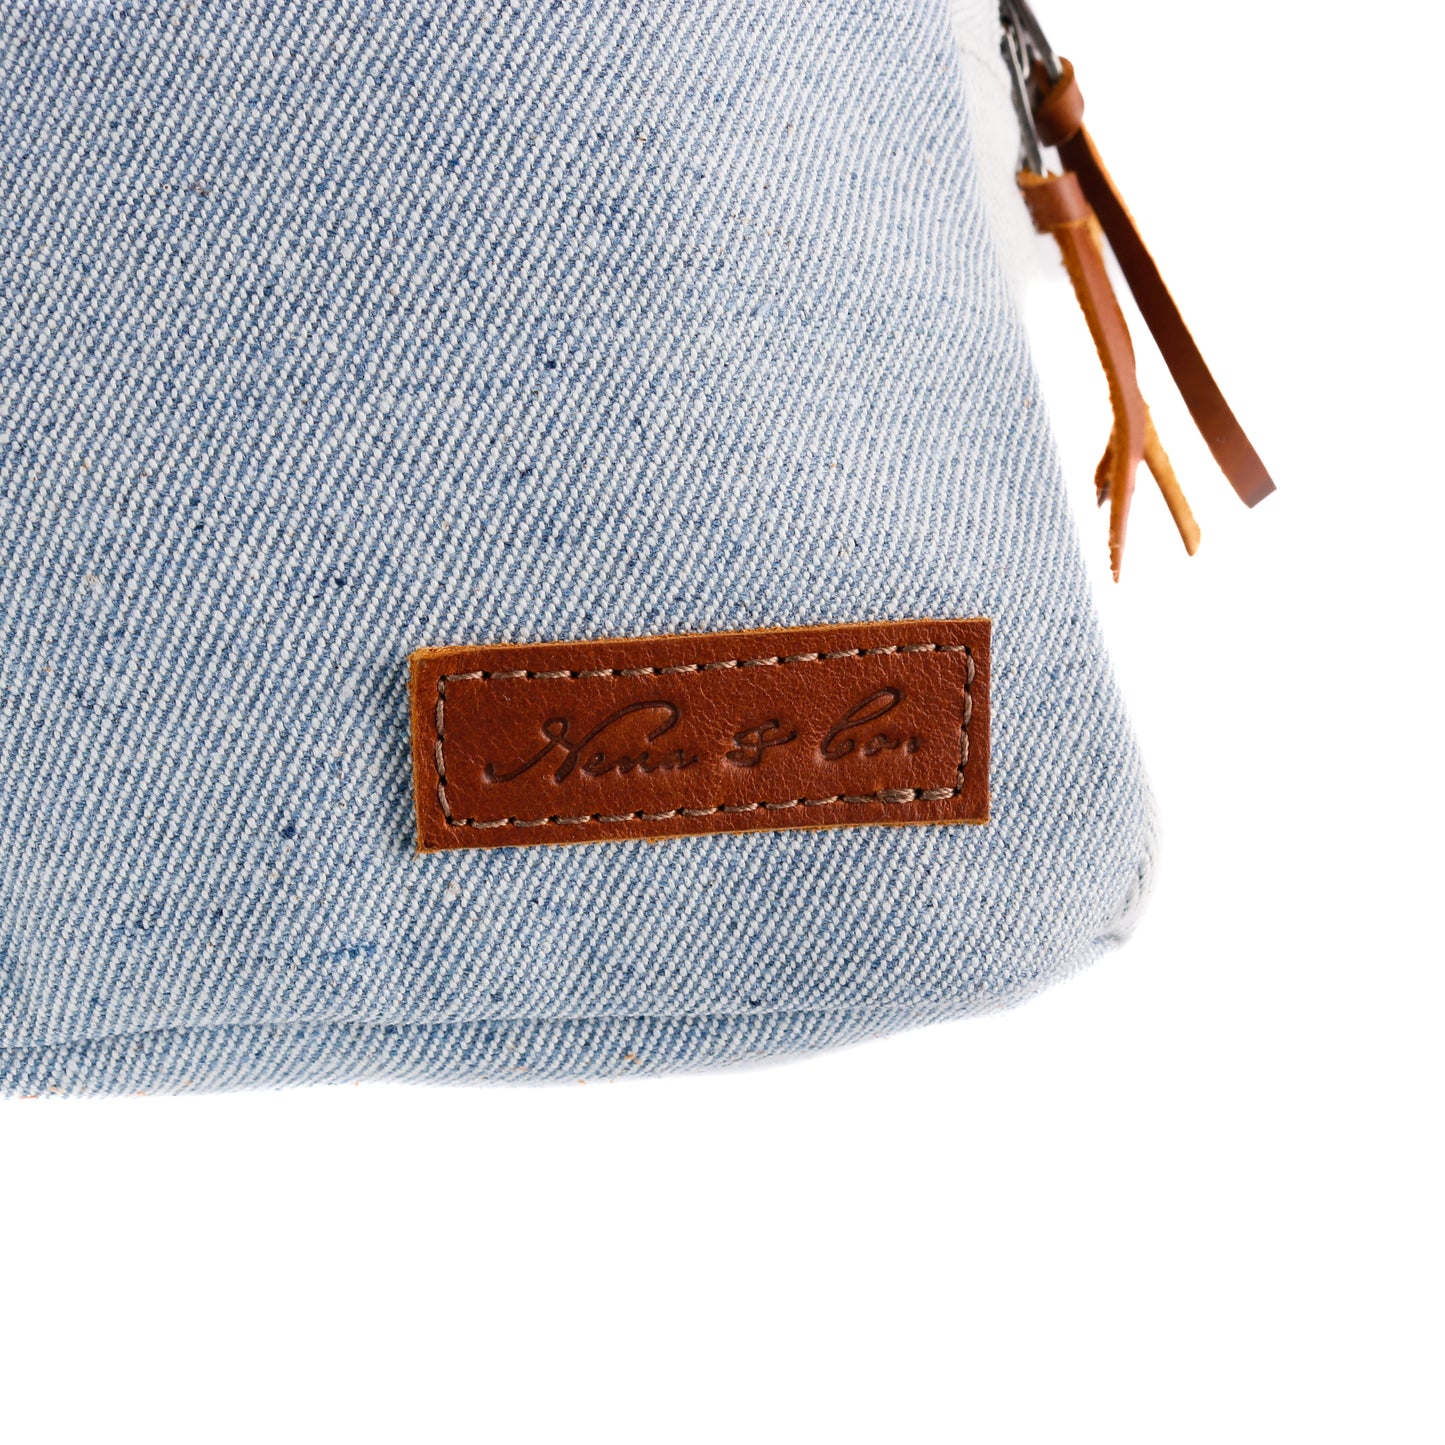 CROSSBODY SLING 2.0 - UPCYCLED DENIM WITH PATCH - CAFE - NO. 11340